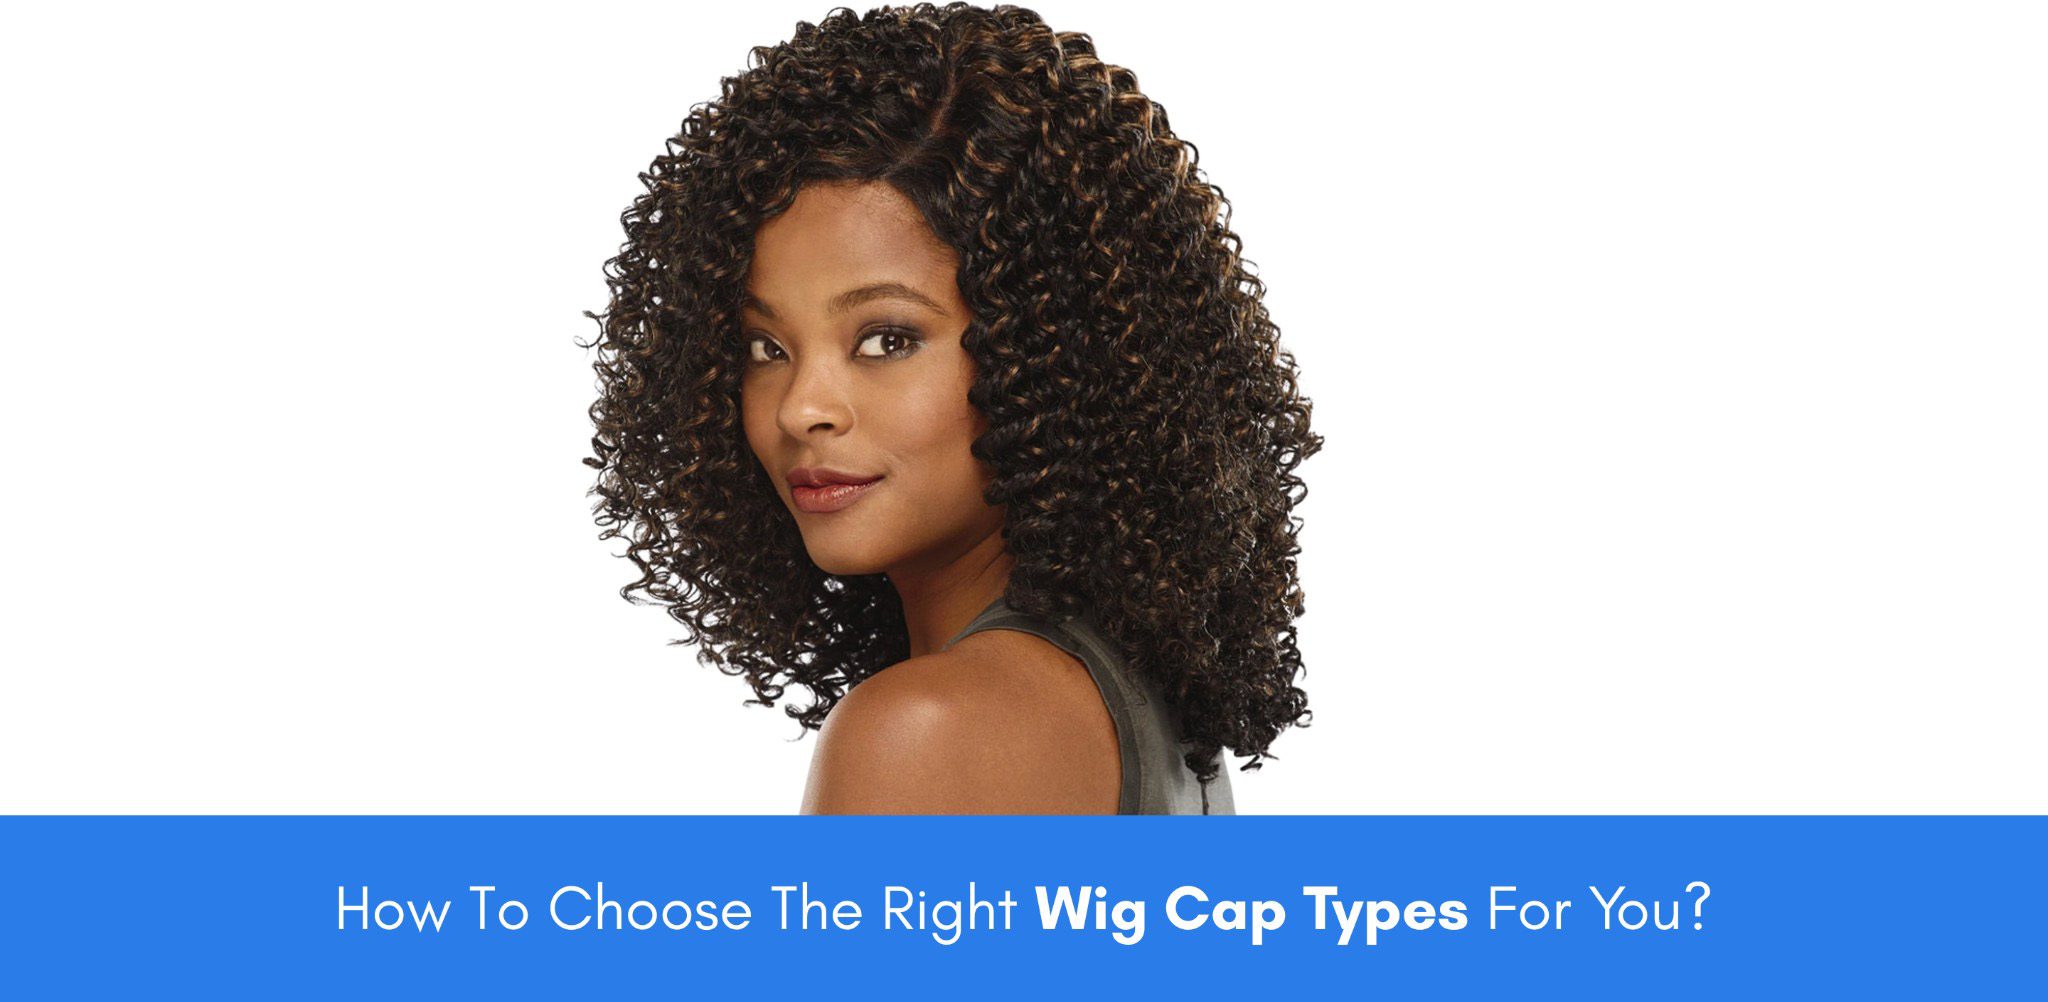 How To Choose The Right Wig Cap Types For You?